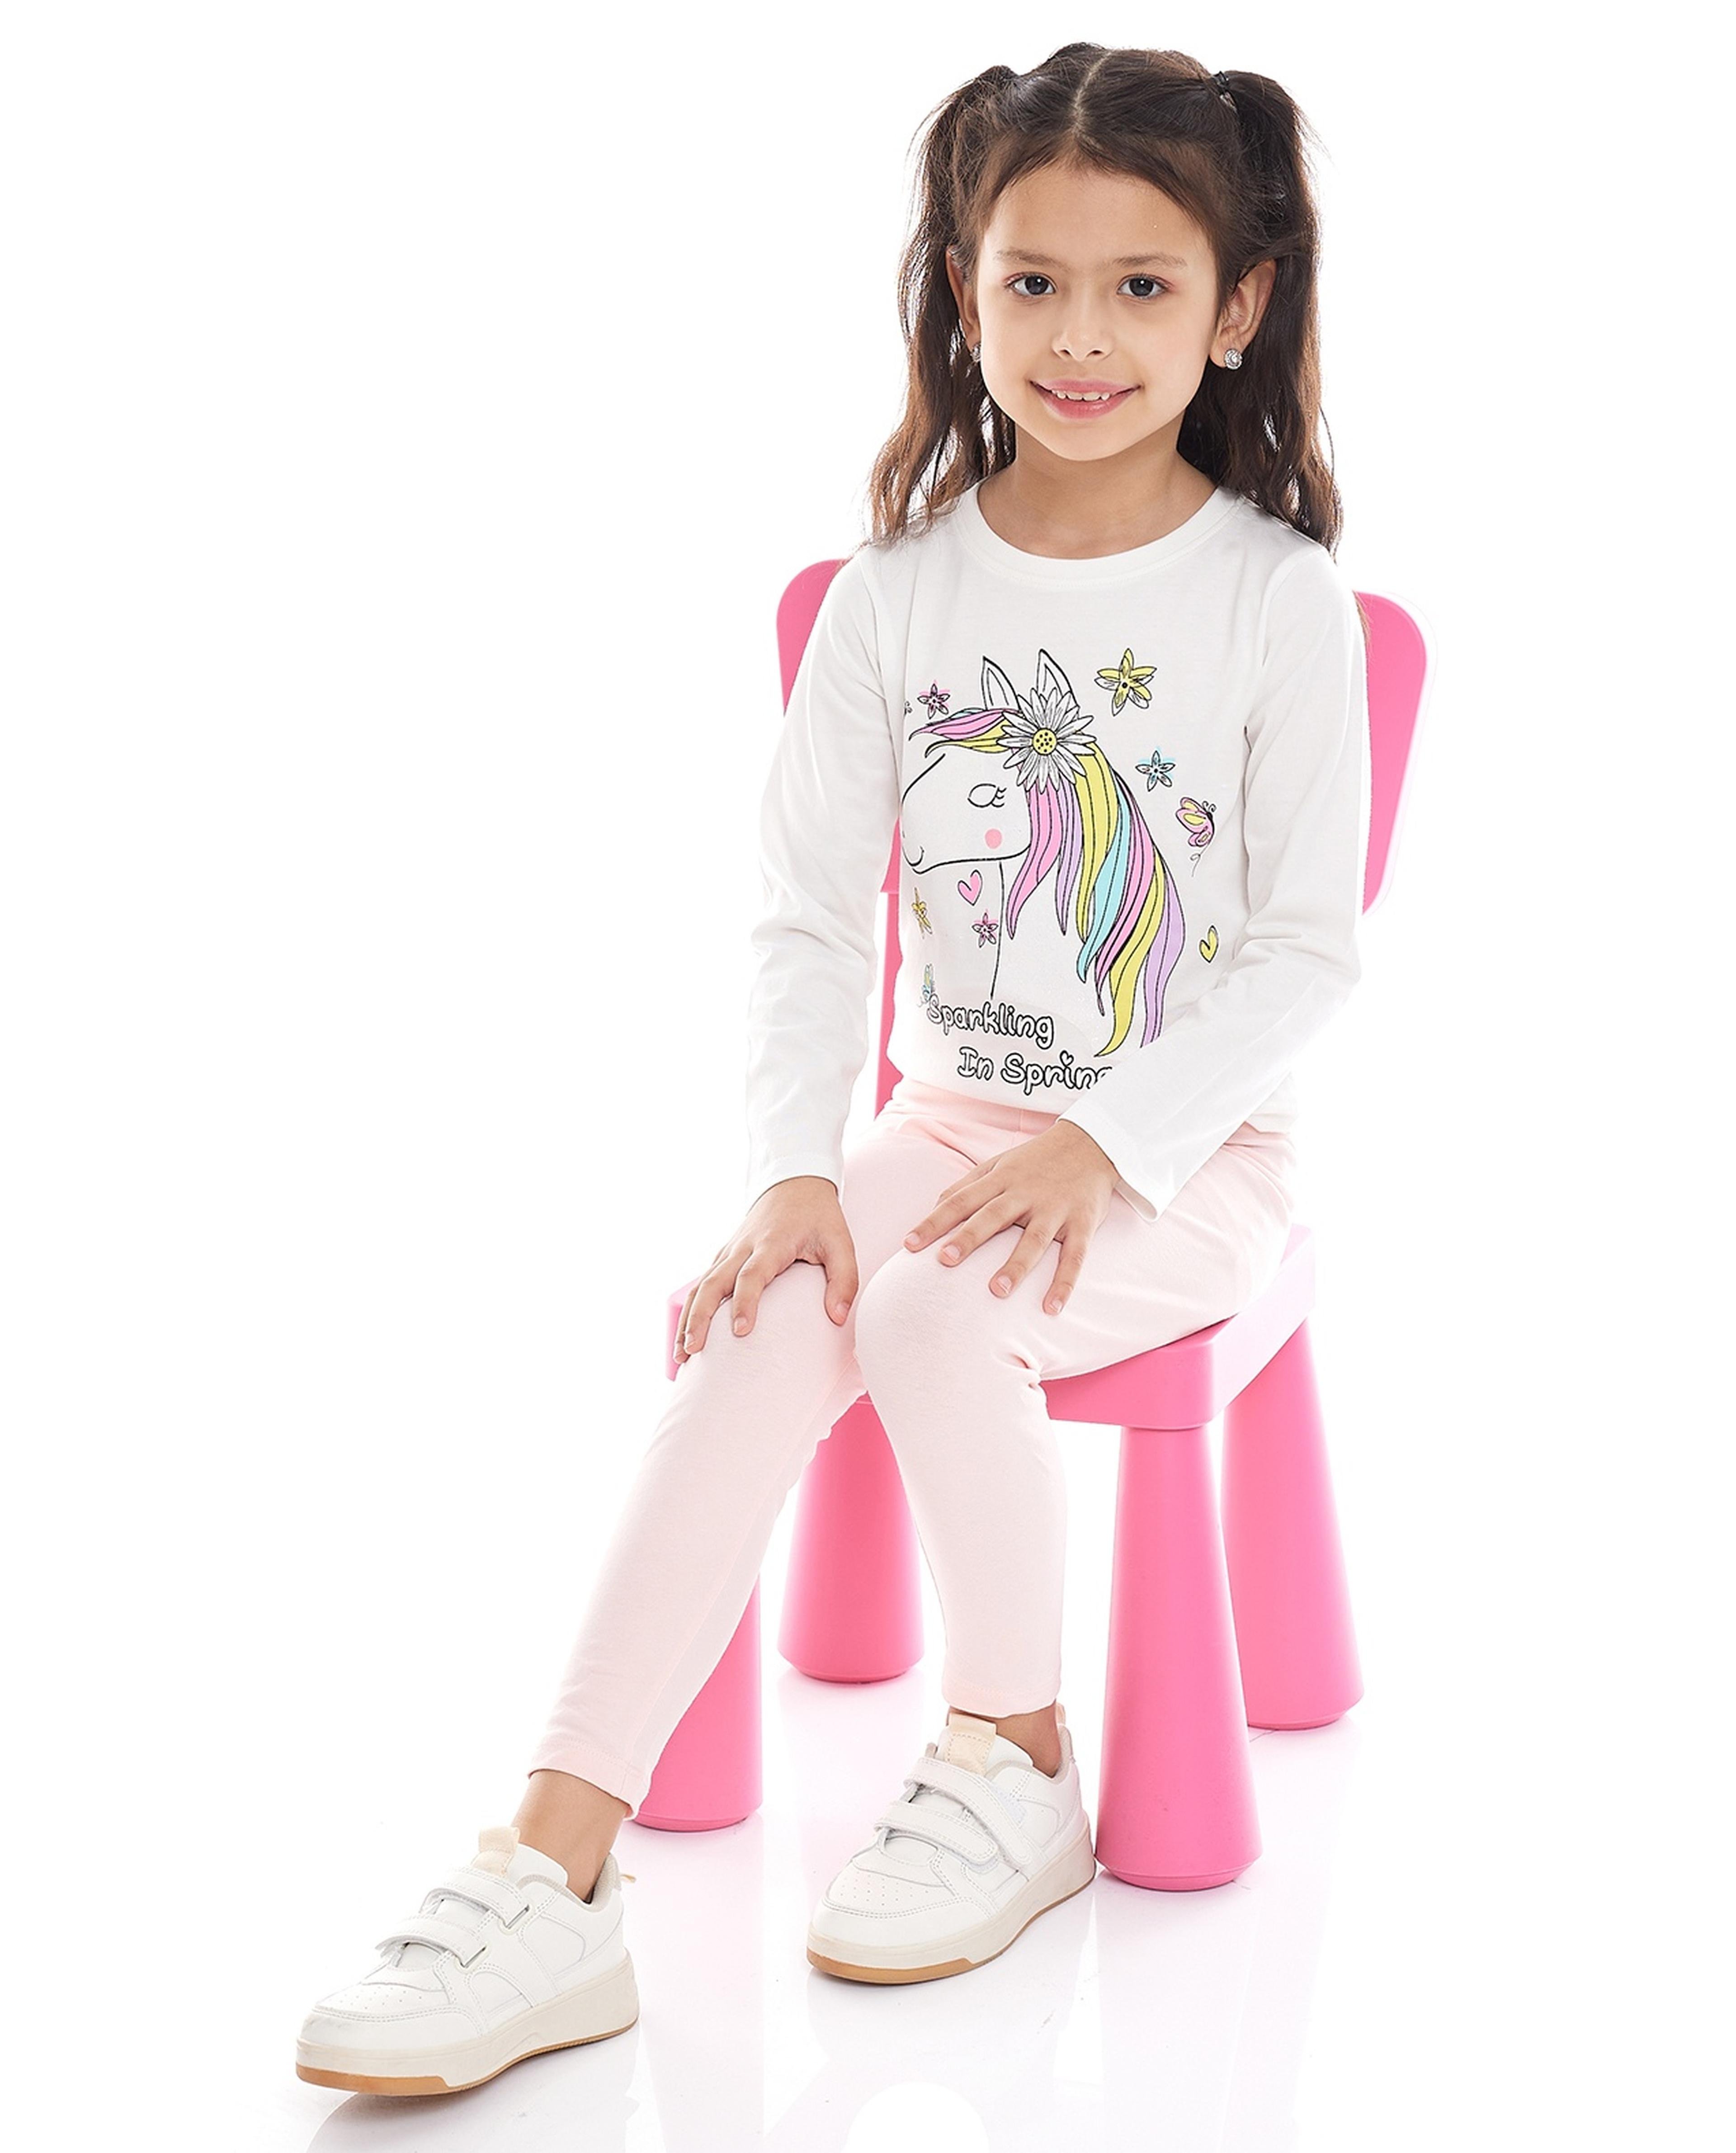 Unicorn Print T-Shirt with Crew Neck and Long Sleeves